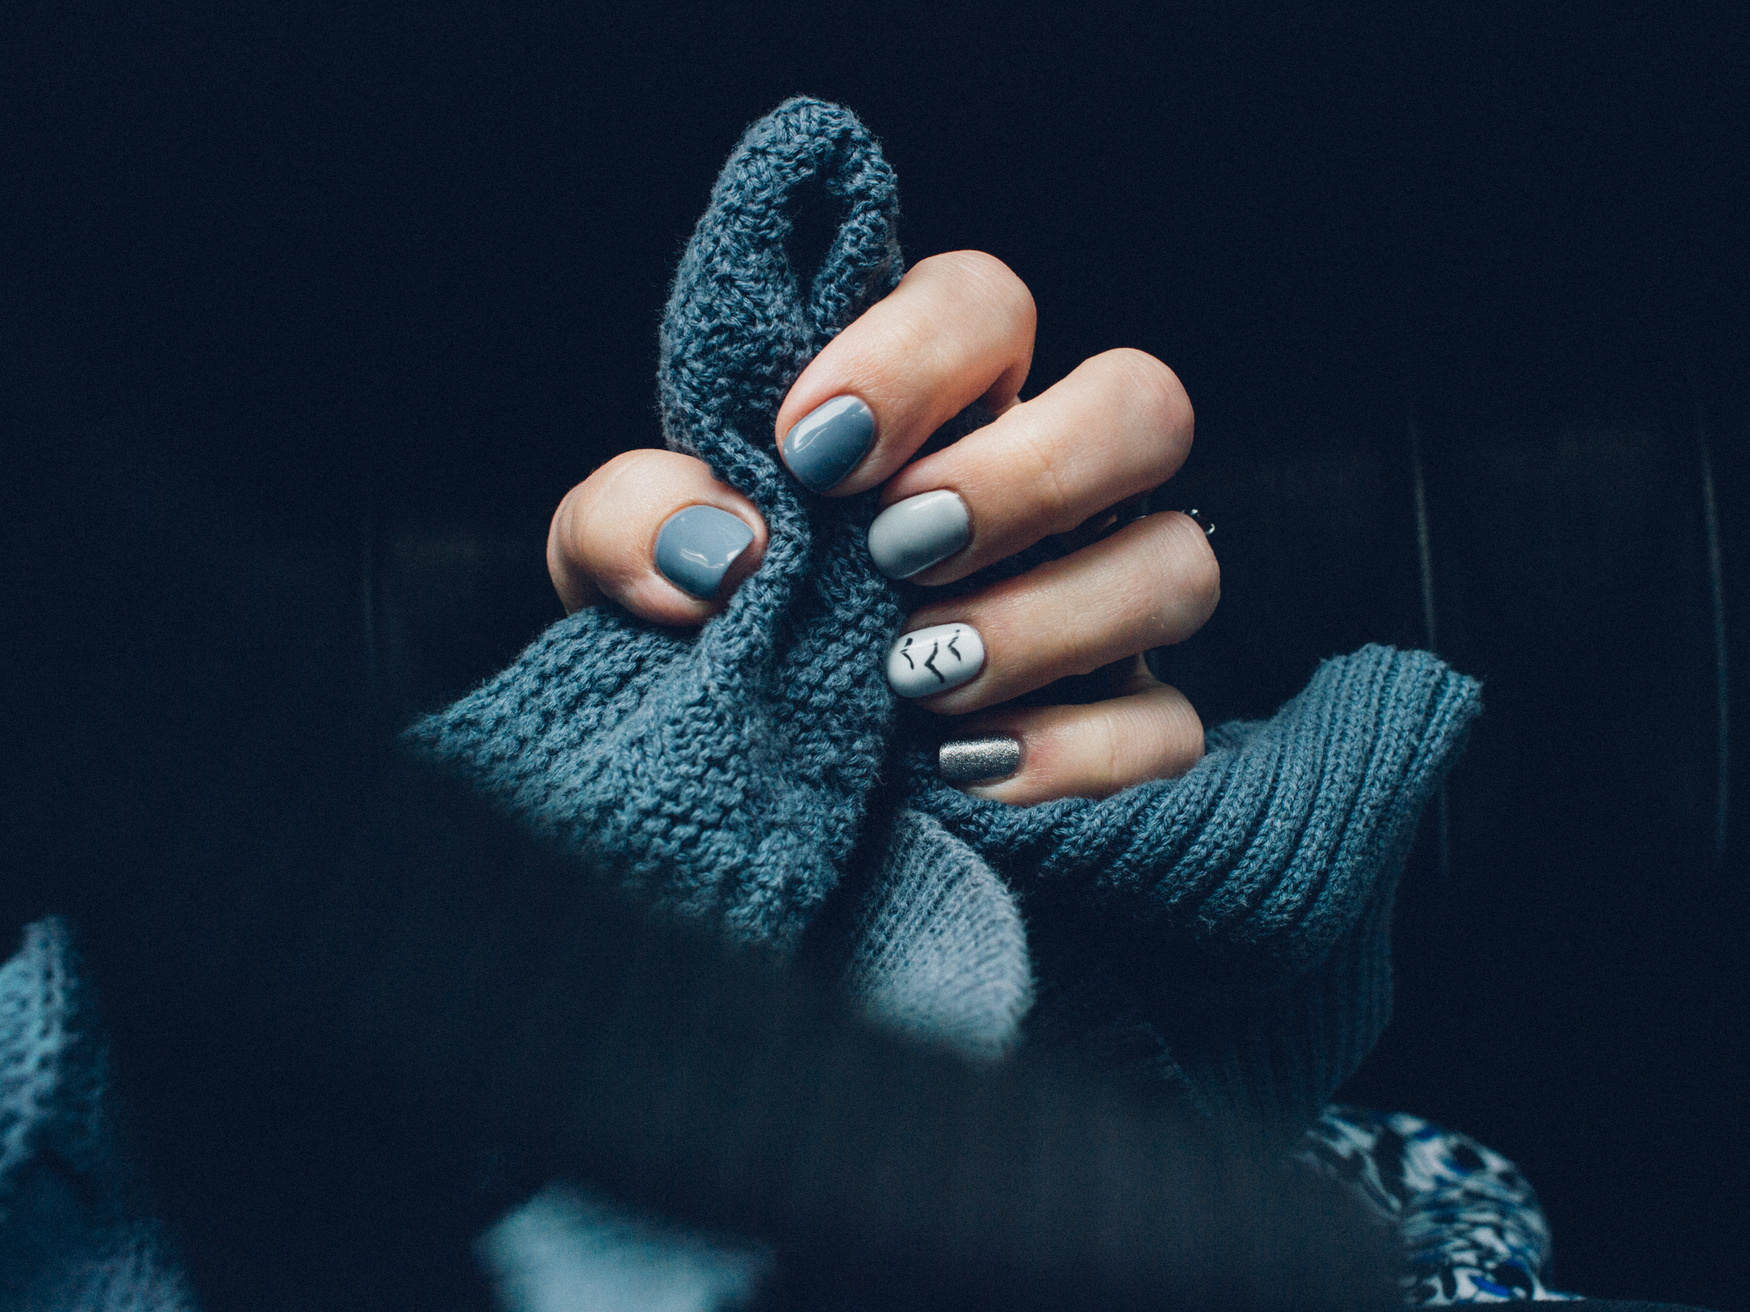 Blue Knitted Clothing And Nails